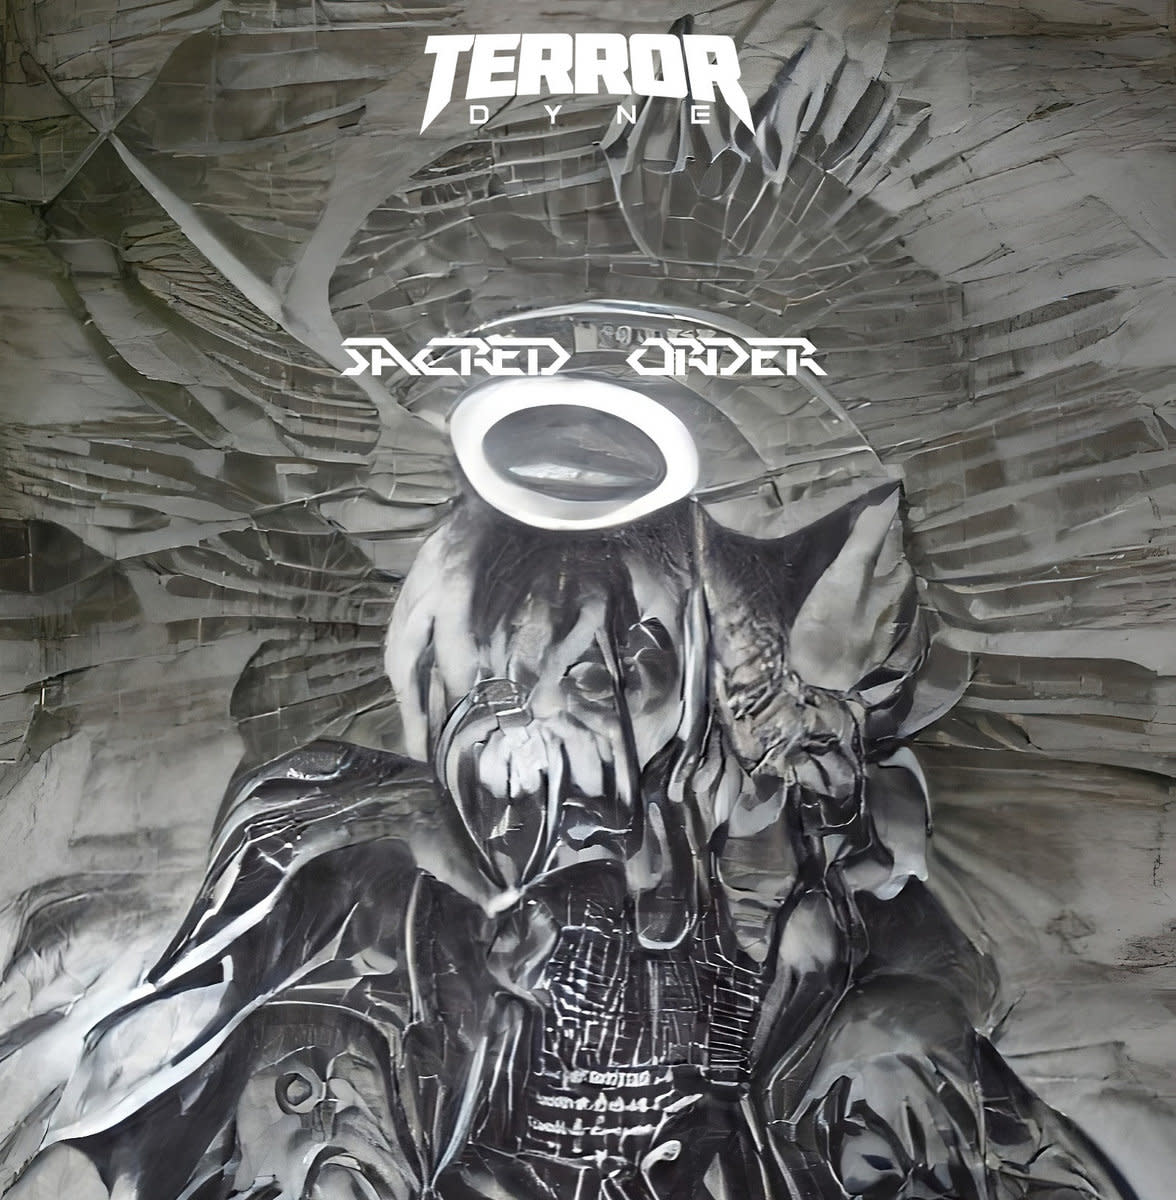 synth-album-review-sacred-order-by-terrordyne